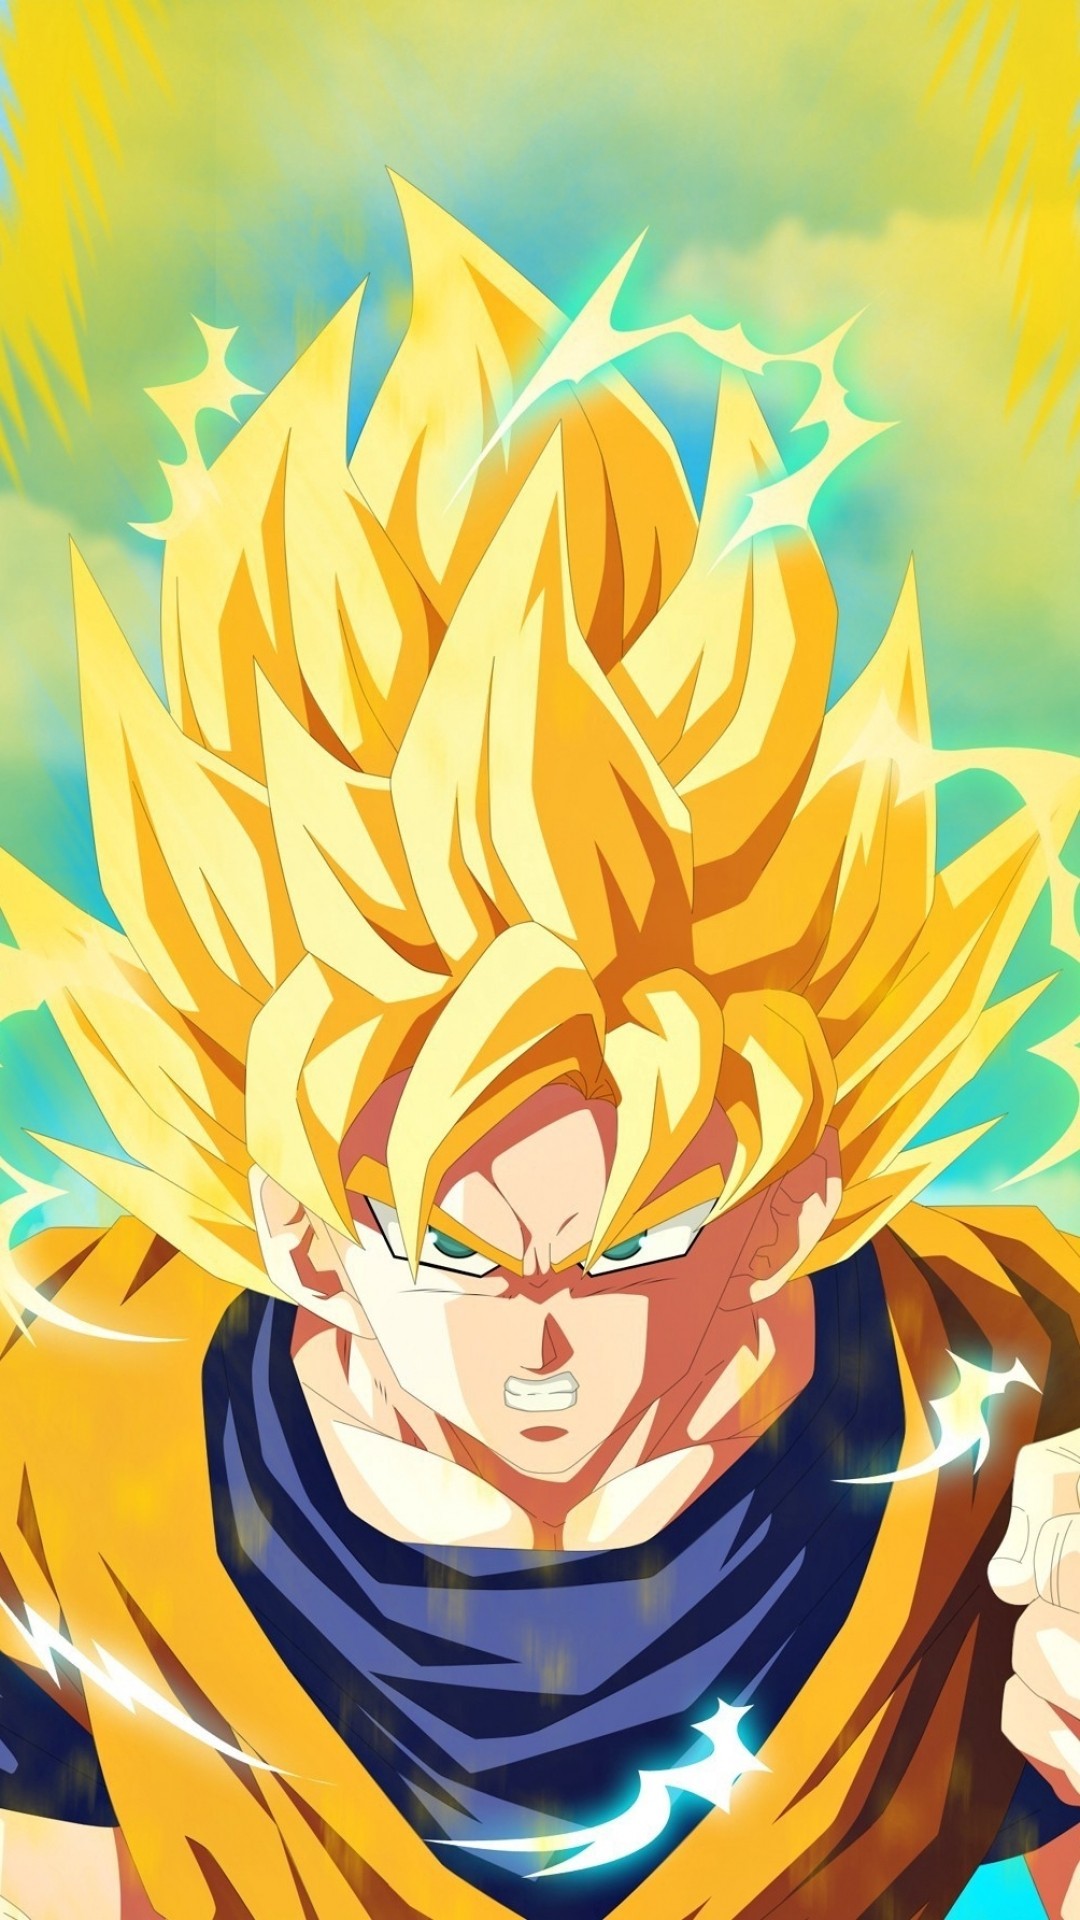 Wallpaper iPhone Goku Super Saiyan with image resolution 1080x1920 pixel. You can make this wallpaper for your iPhone 5, 6, 7, 8, X backgrounds, Mobile Screensaver, or iPad Lock Screen